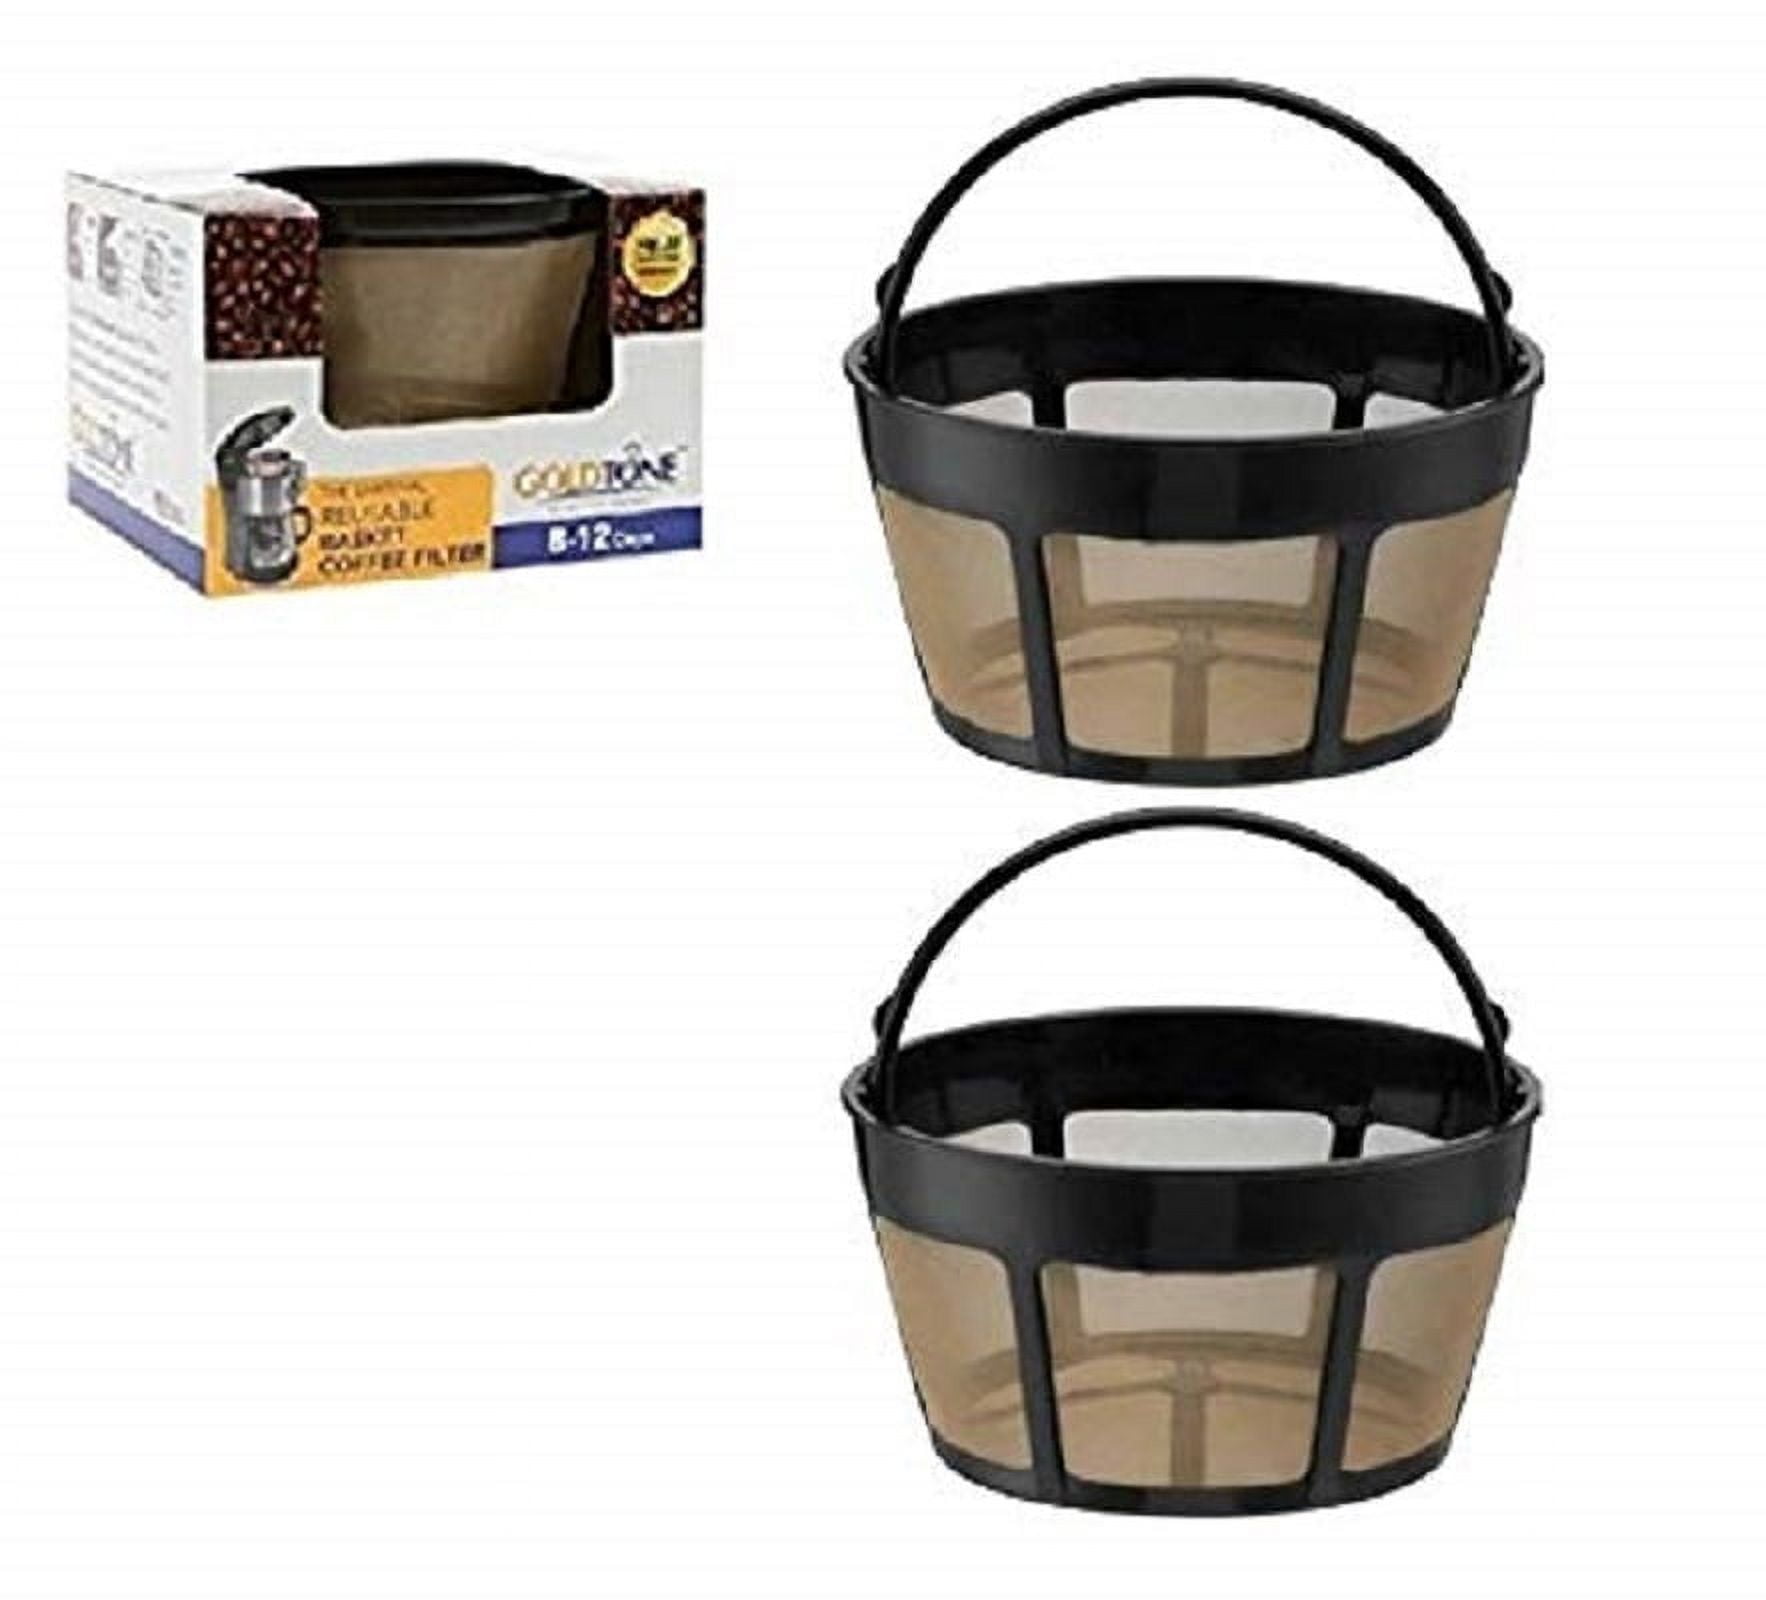 Gazdag Reusable Cone Coffee Filters #4 (2-Pack), 8-12 Cup Gold Permanent Coffee Filter for Cuisinart/Ninja Dual Brew Pro Cfp301/ Hamilton Beach, Size